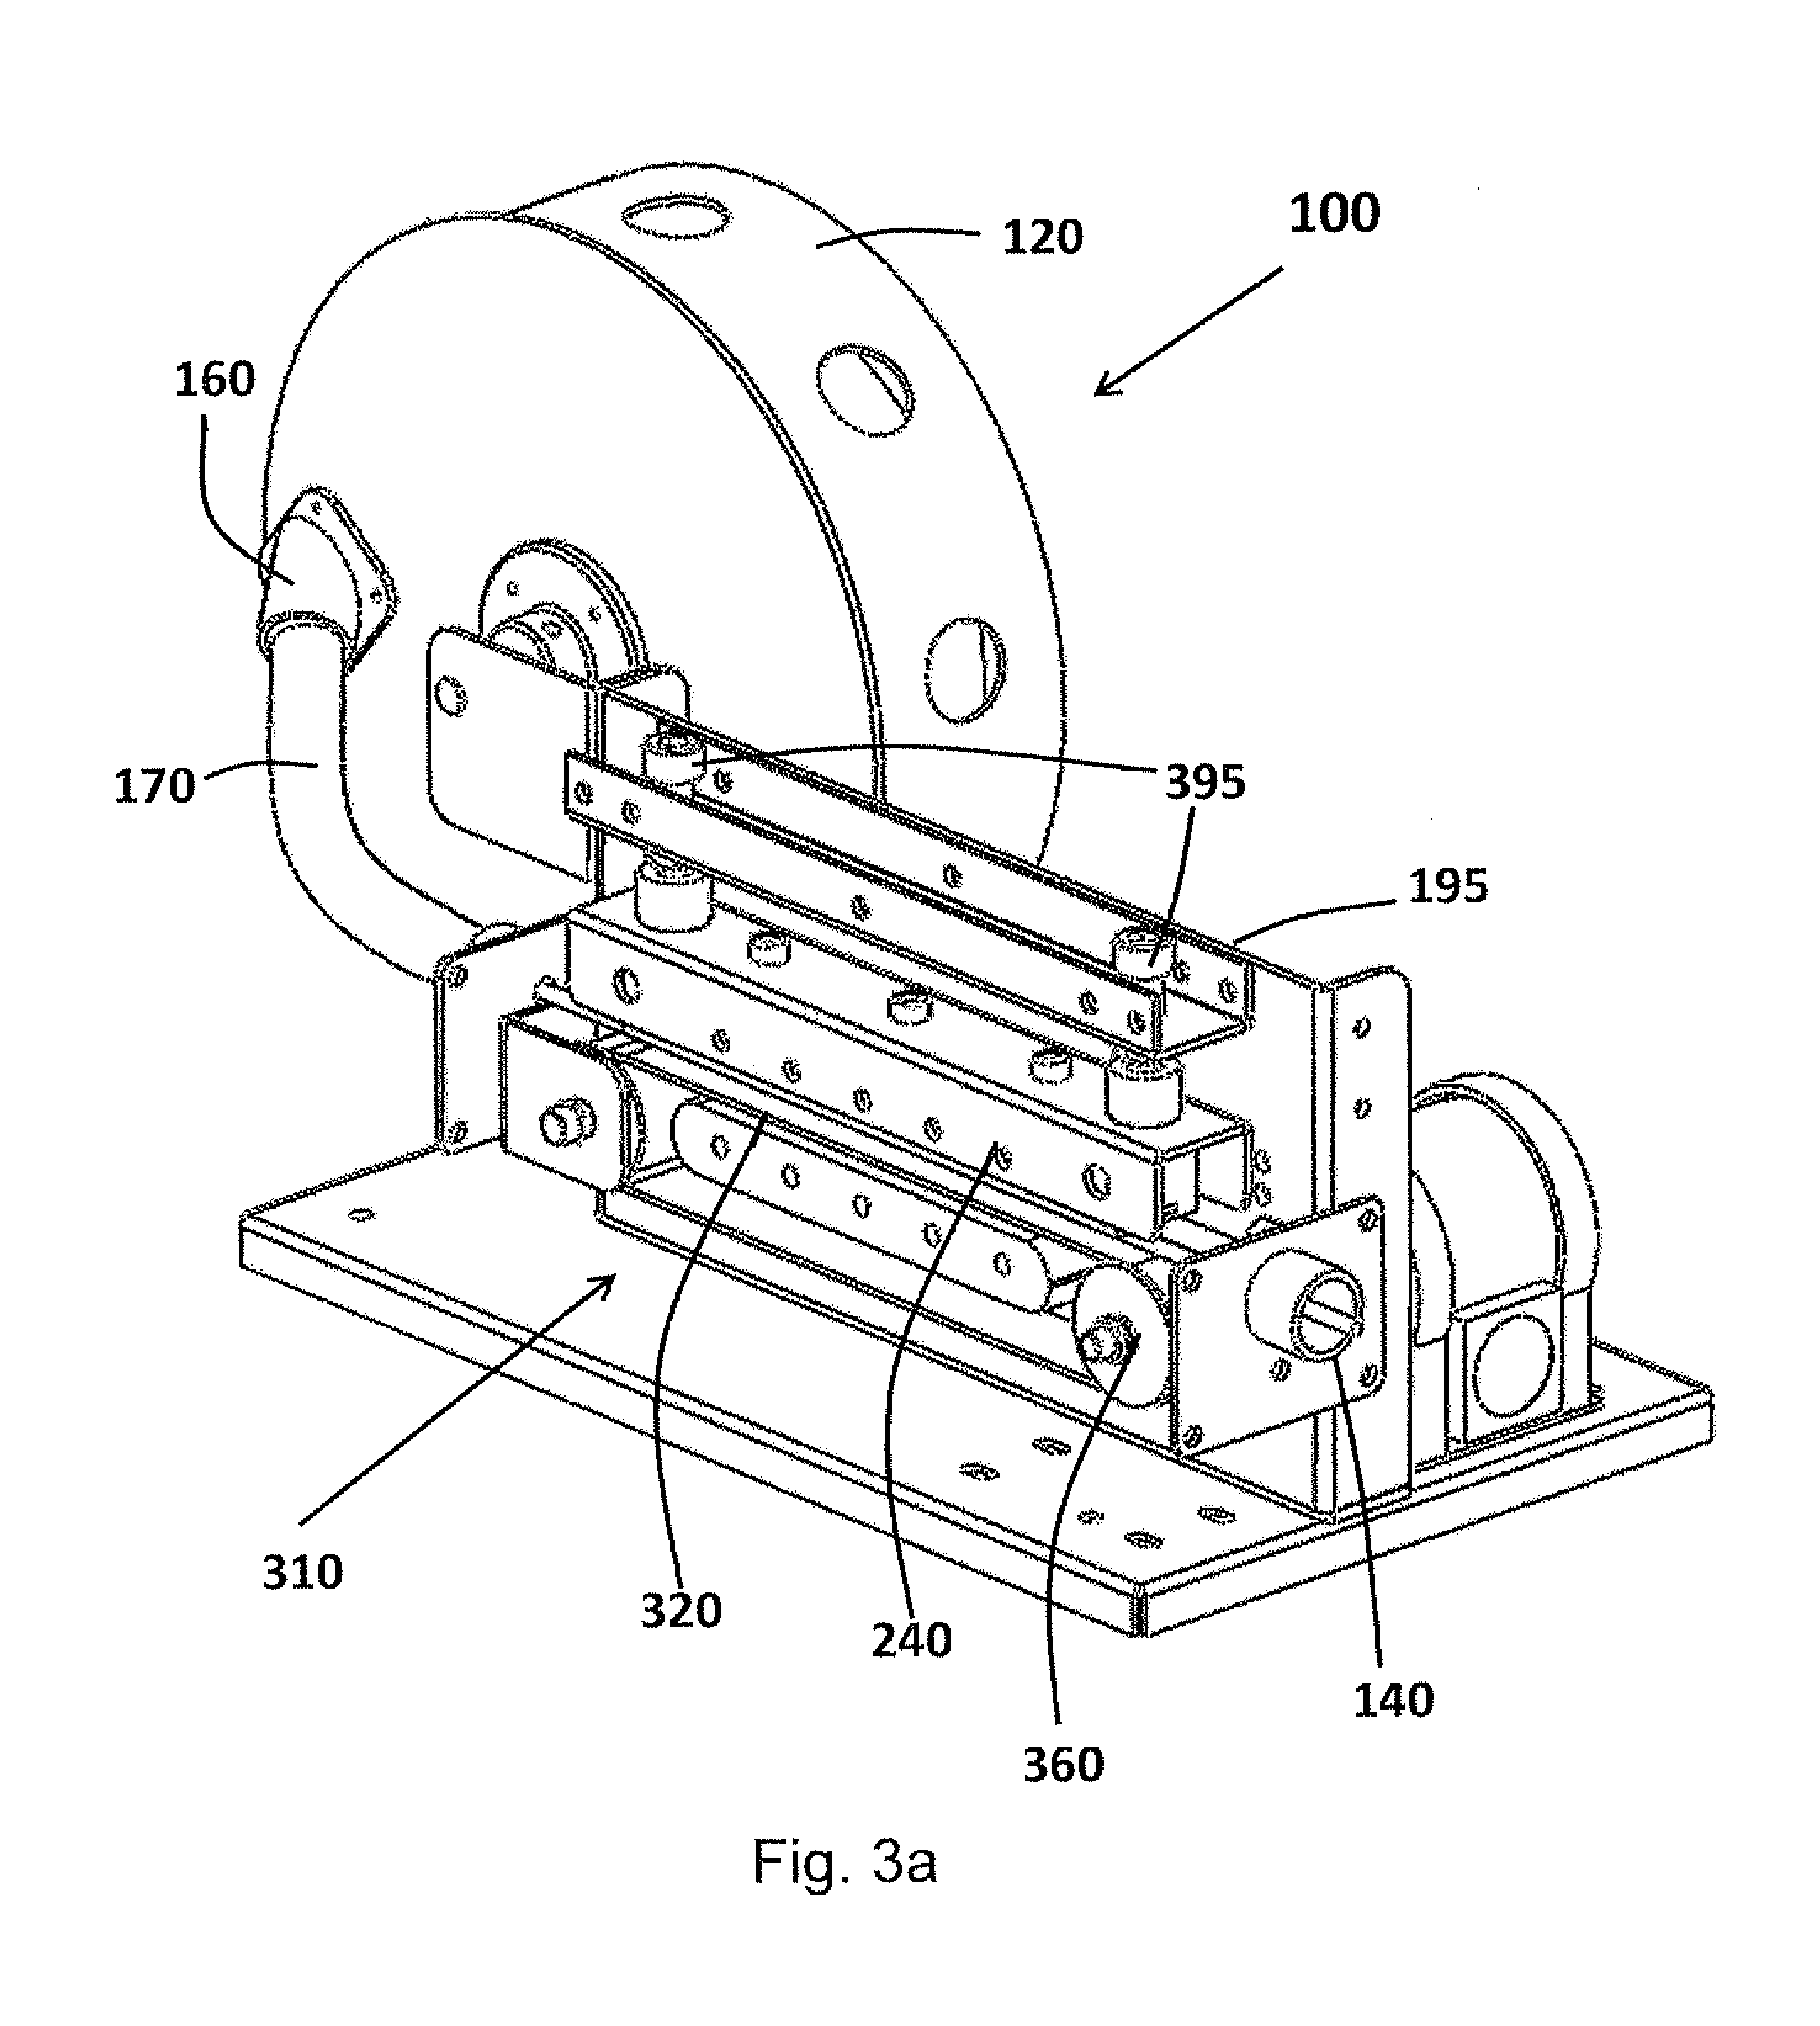 Device and method for fish tape reel system